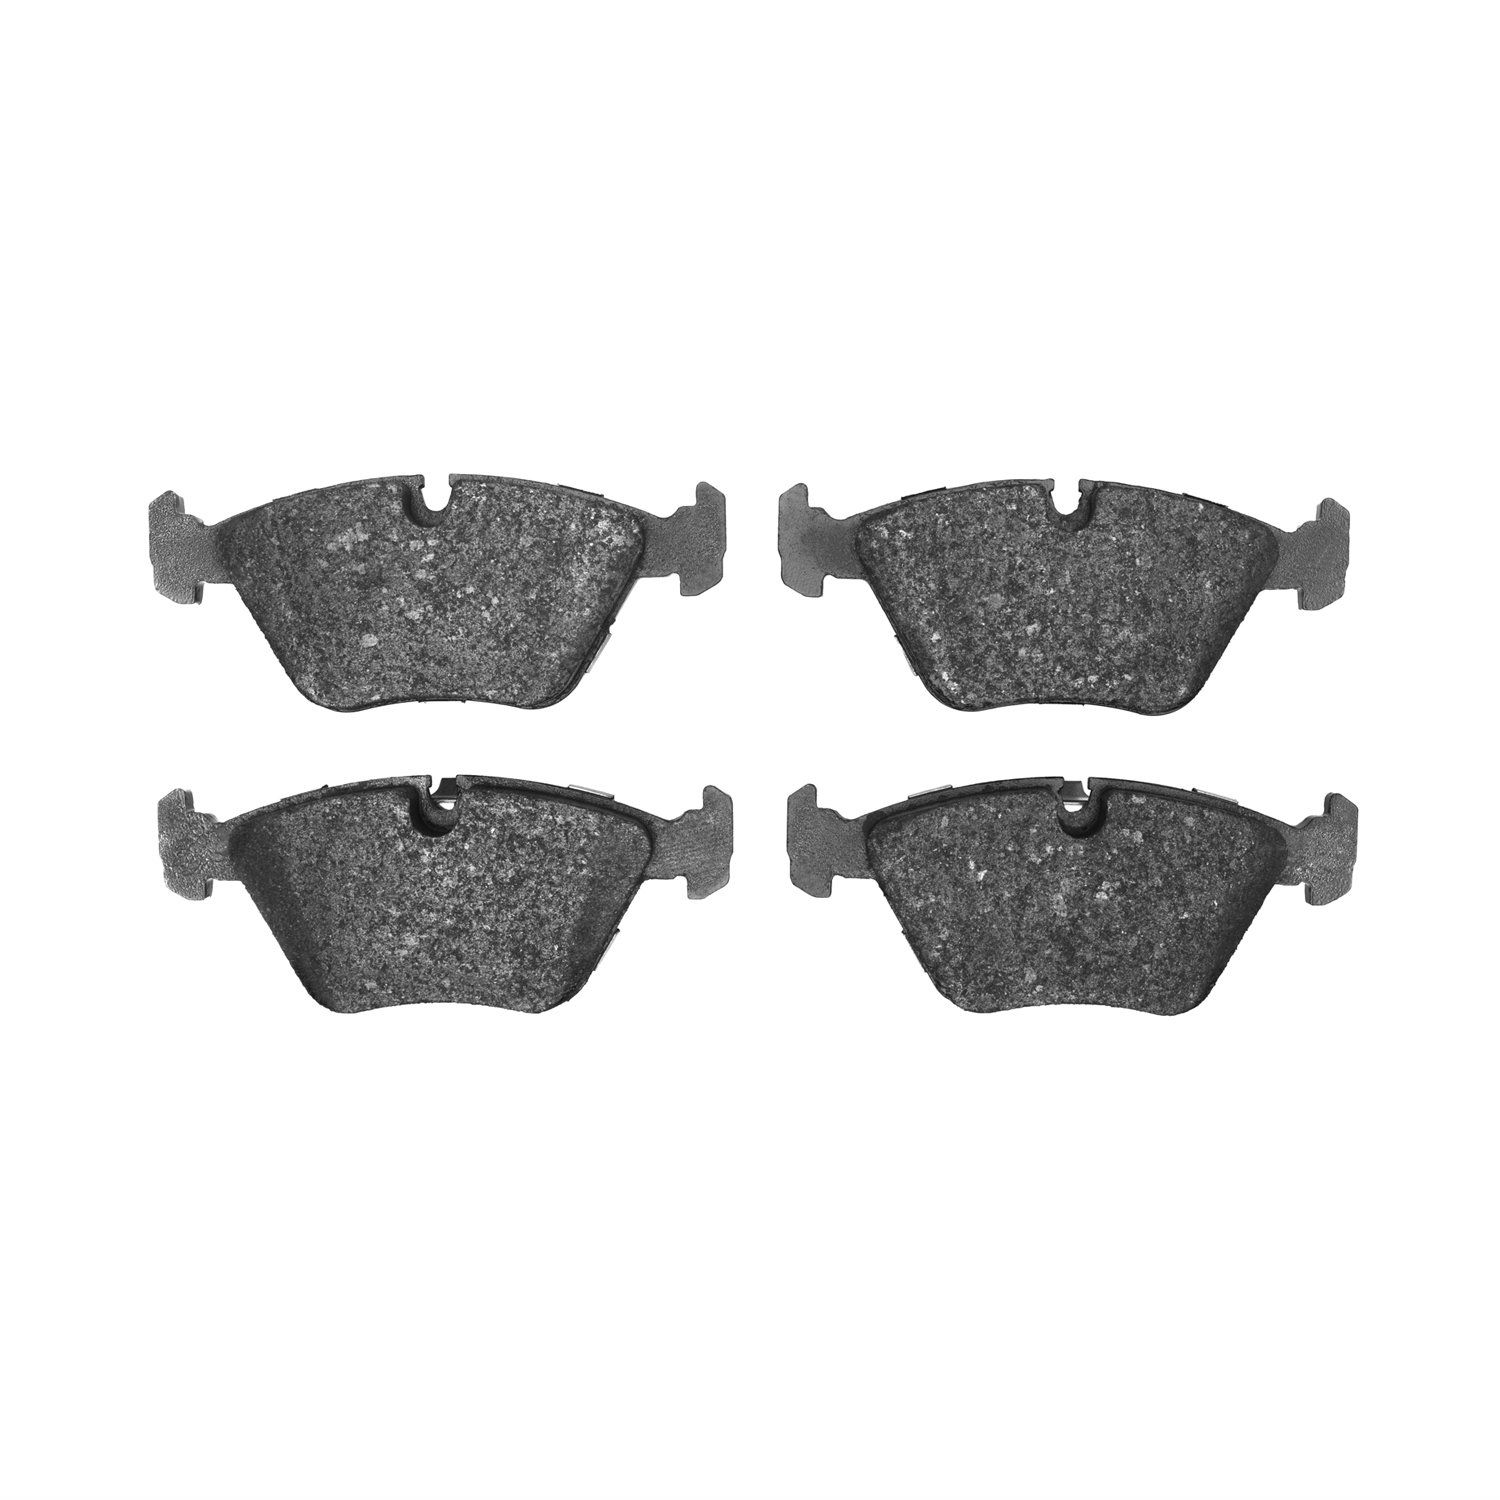 1551-0394-10 5000 Advanced Low-Metallic Brake Pads, 1989-2006 Multiple Makes/Models, Position: Front